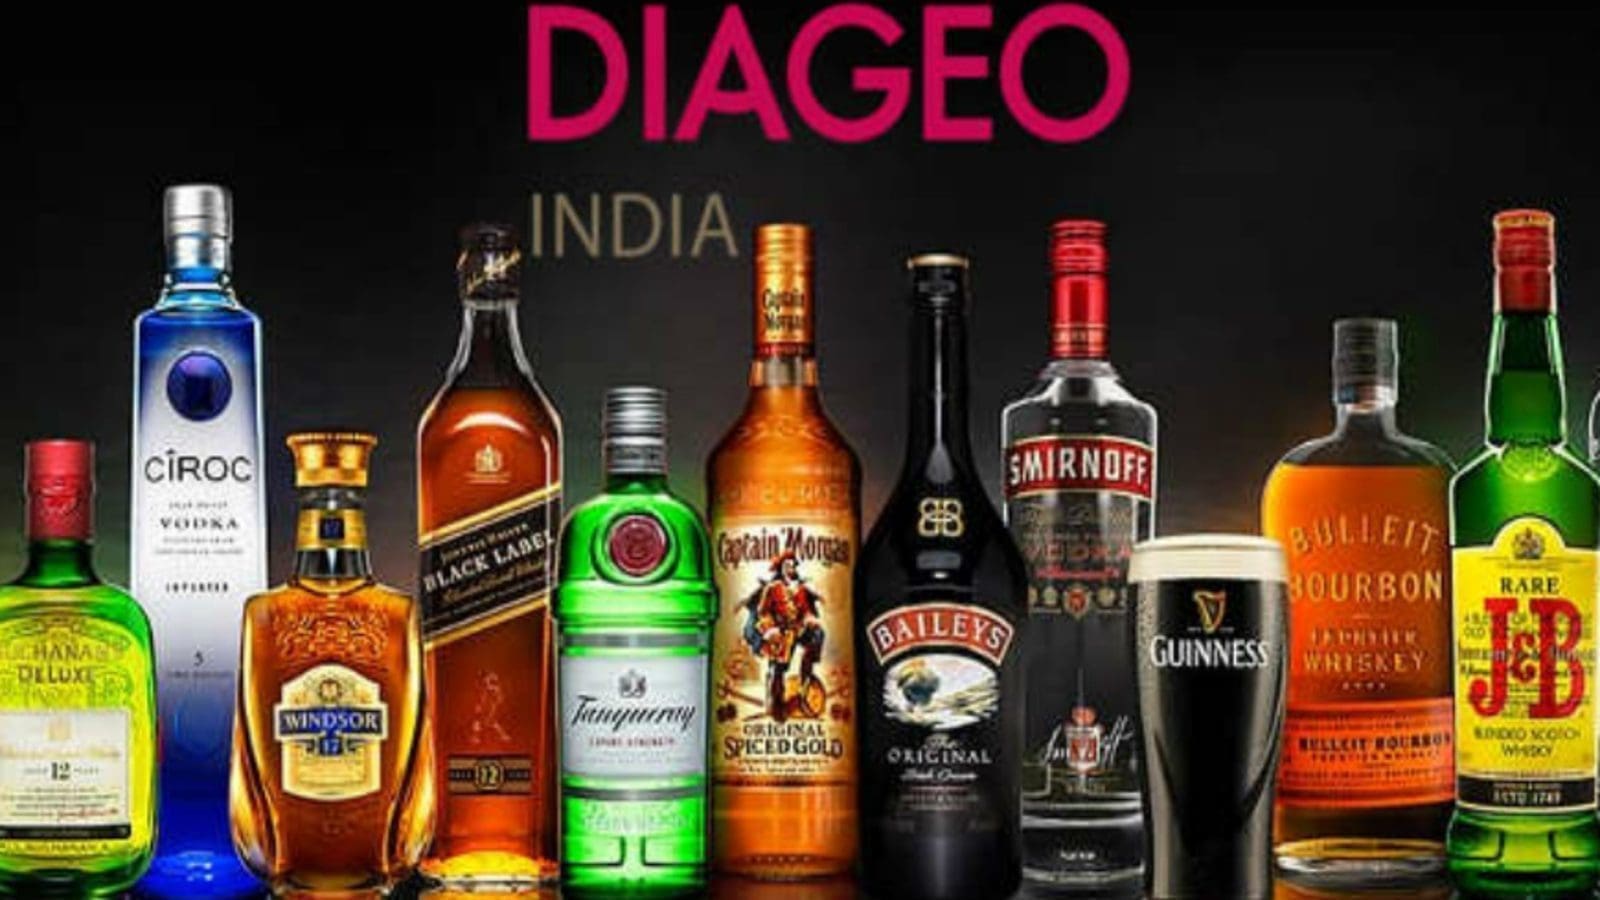 Diageo seeks to cement dominance in East African market through acquisition of additional shares in EABL